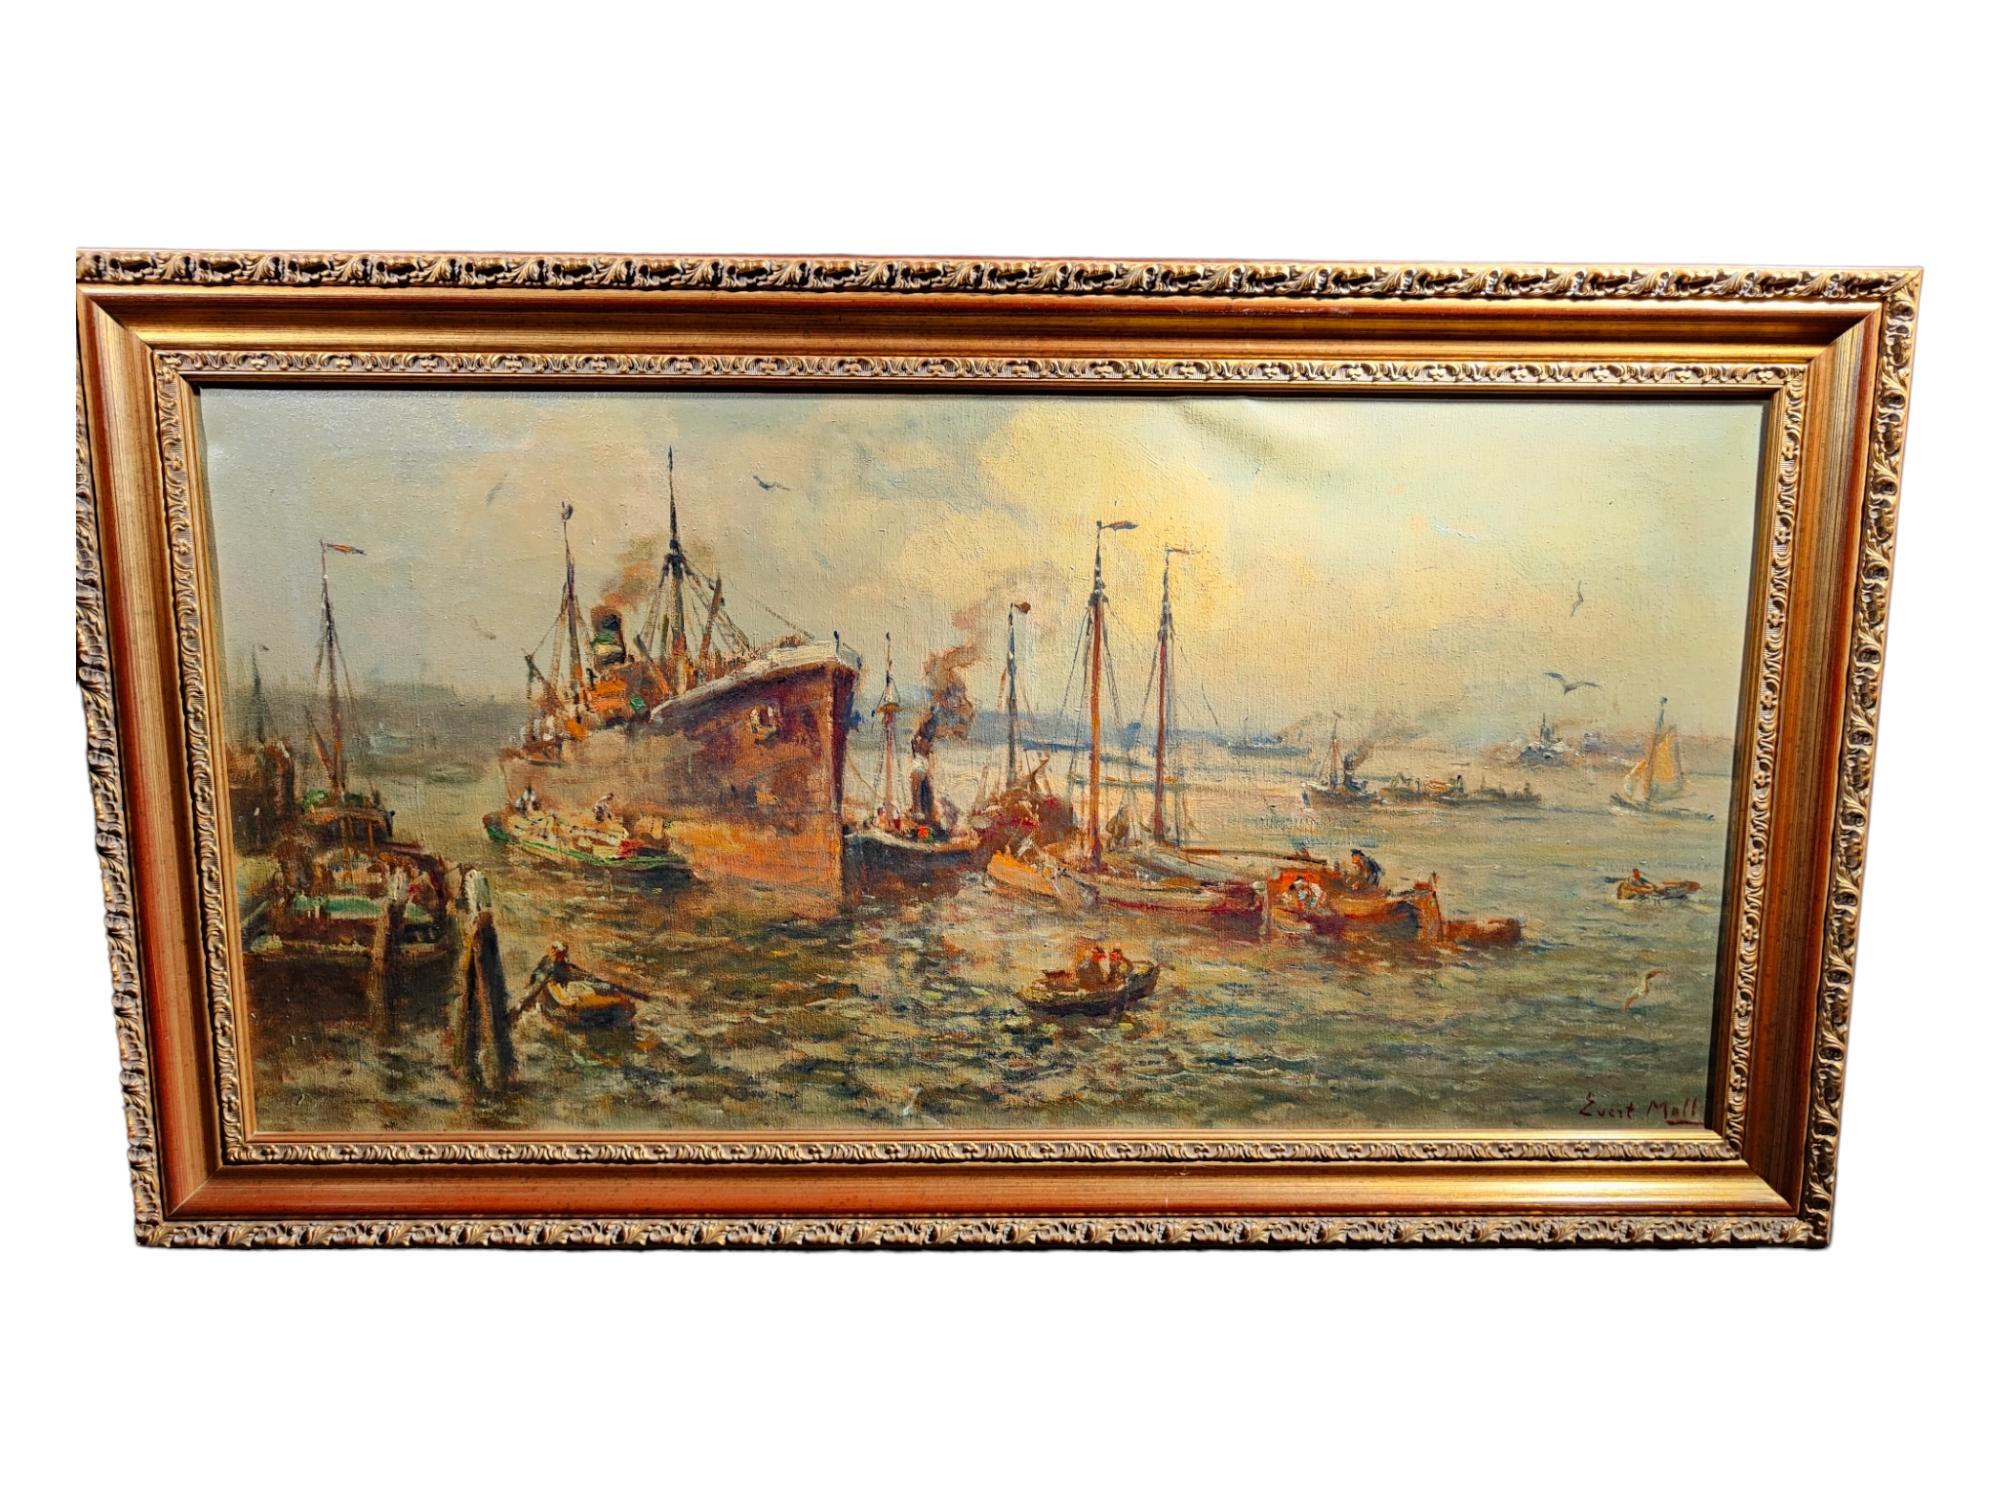 Large Marine oil by Evert Moll Voorburg 1878 - 1955 The Hague

Evert Moll Voorburg 1878 - 1955 The Hague The Hague School The painter Evert Moll lived and worked between 1895 and 1930 in Voorburg, London, Paris, The Hague and Rotterdam. Later he